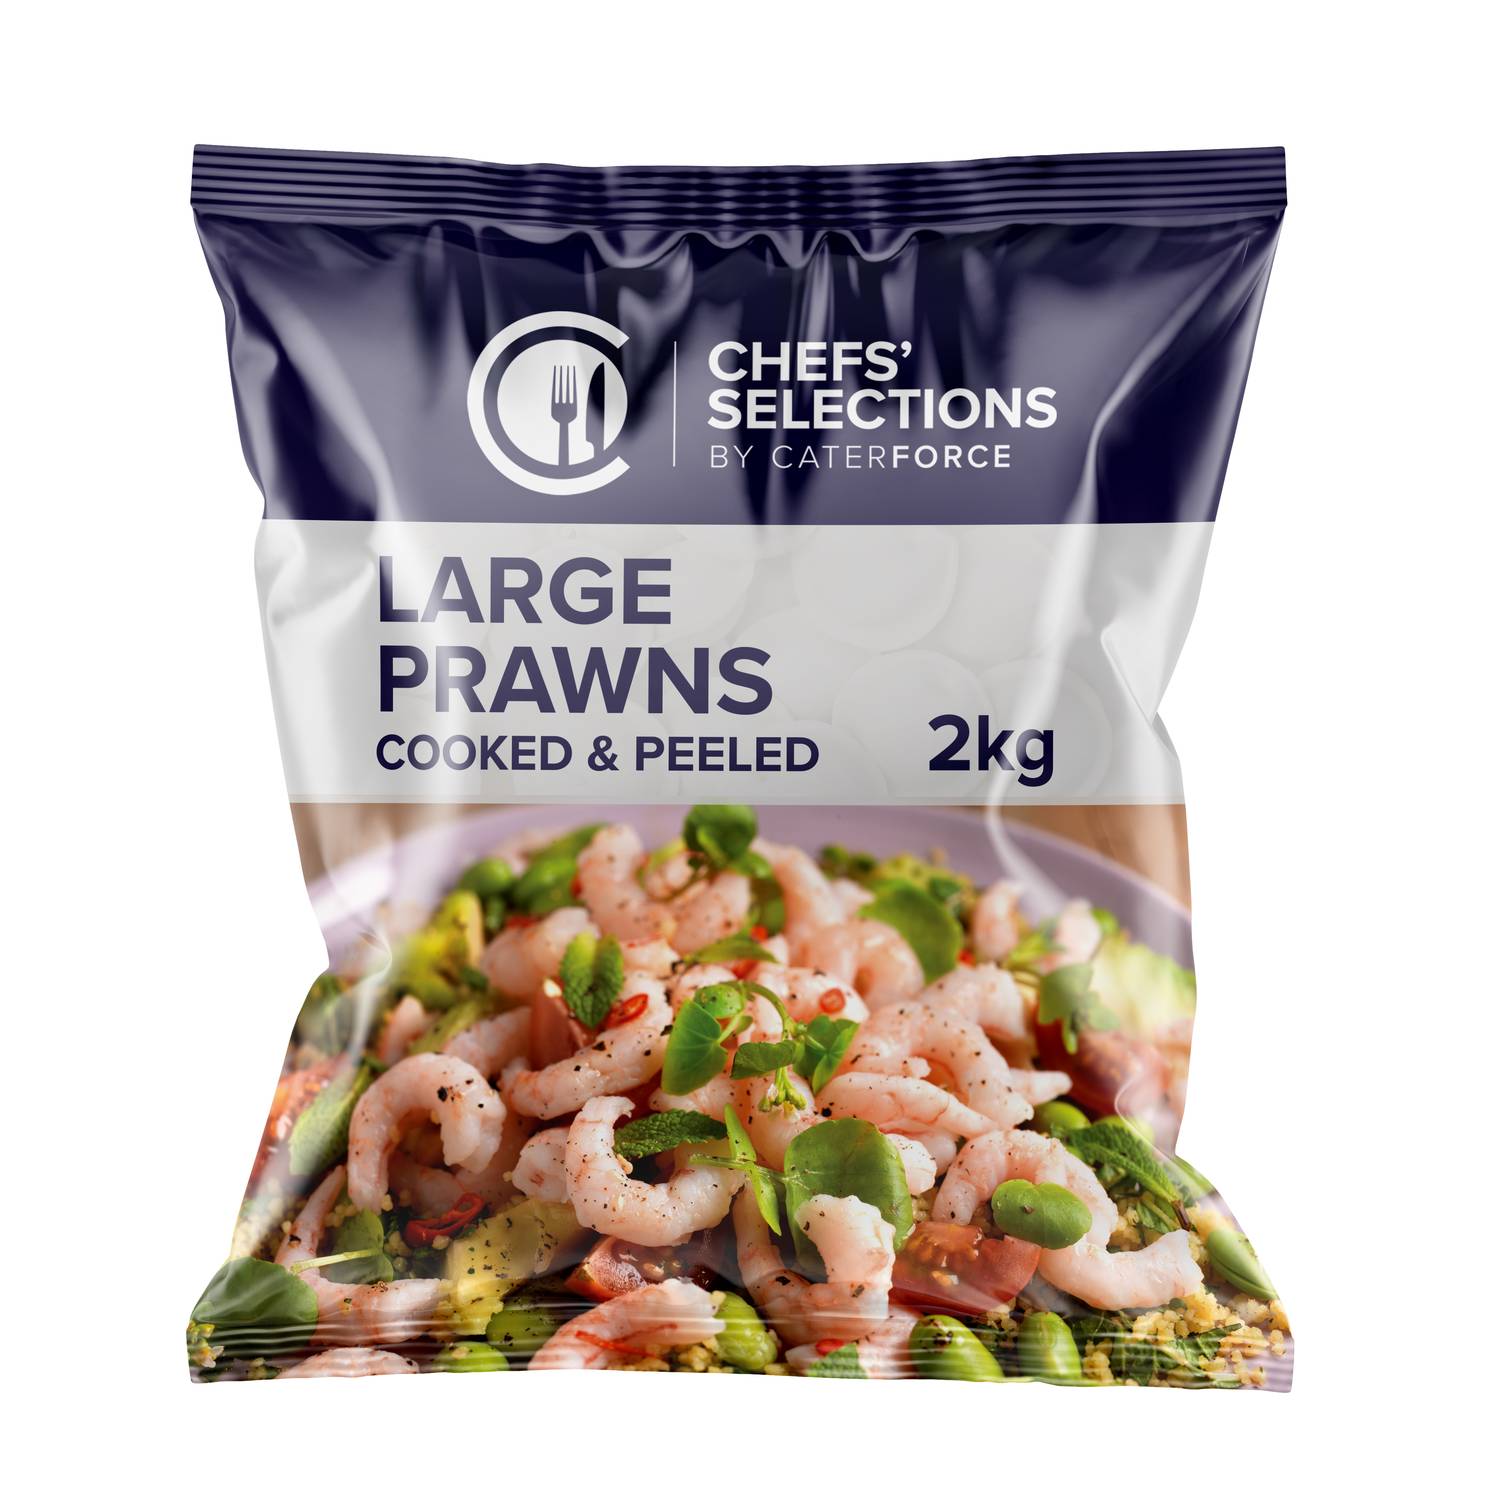 Chefs’ Selections Large Cold Water Prawns – Cooked & Peeled (5 x 2kg)